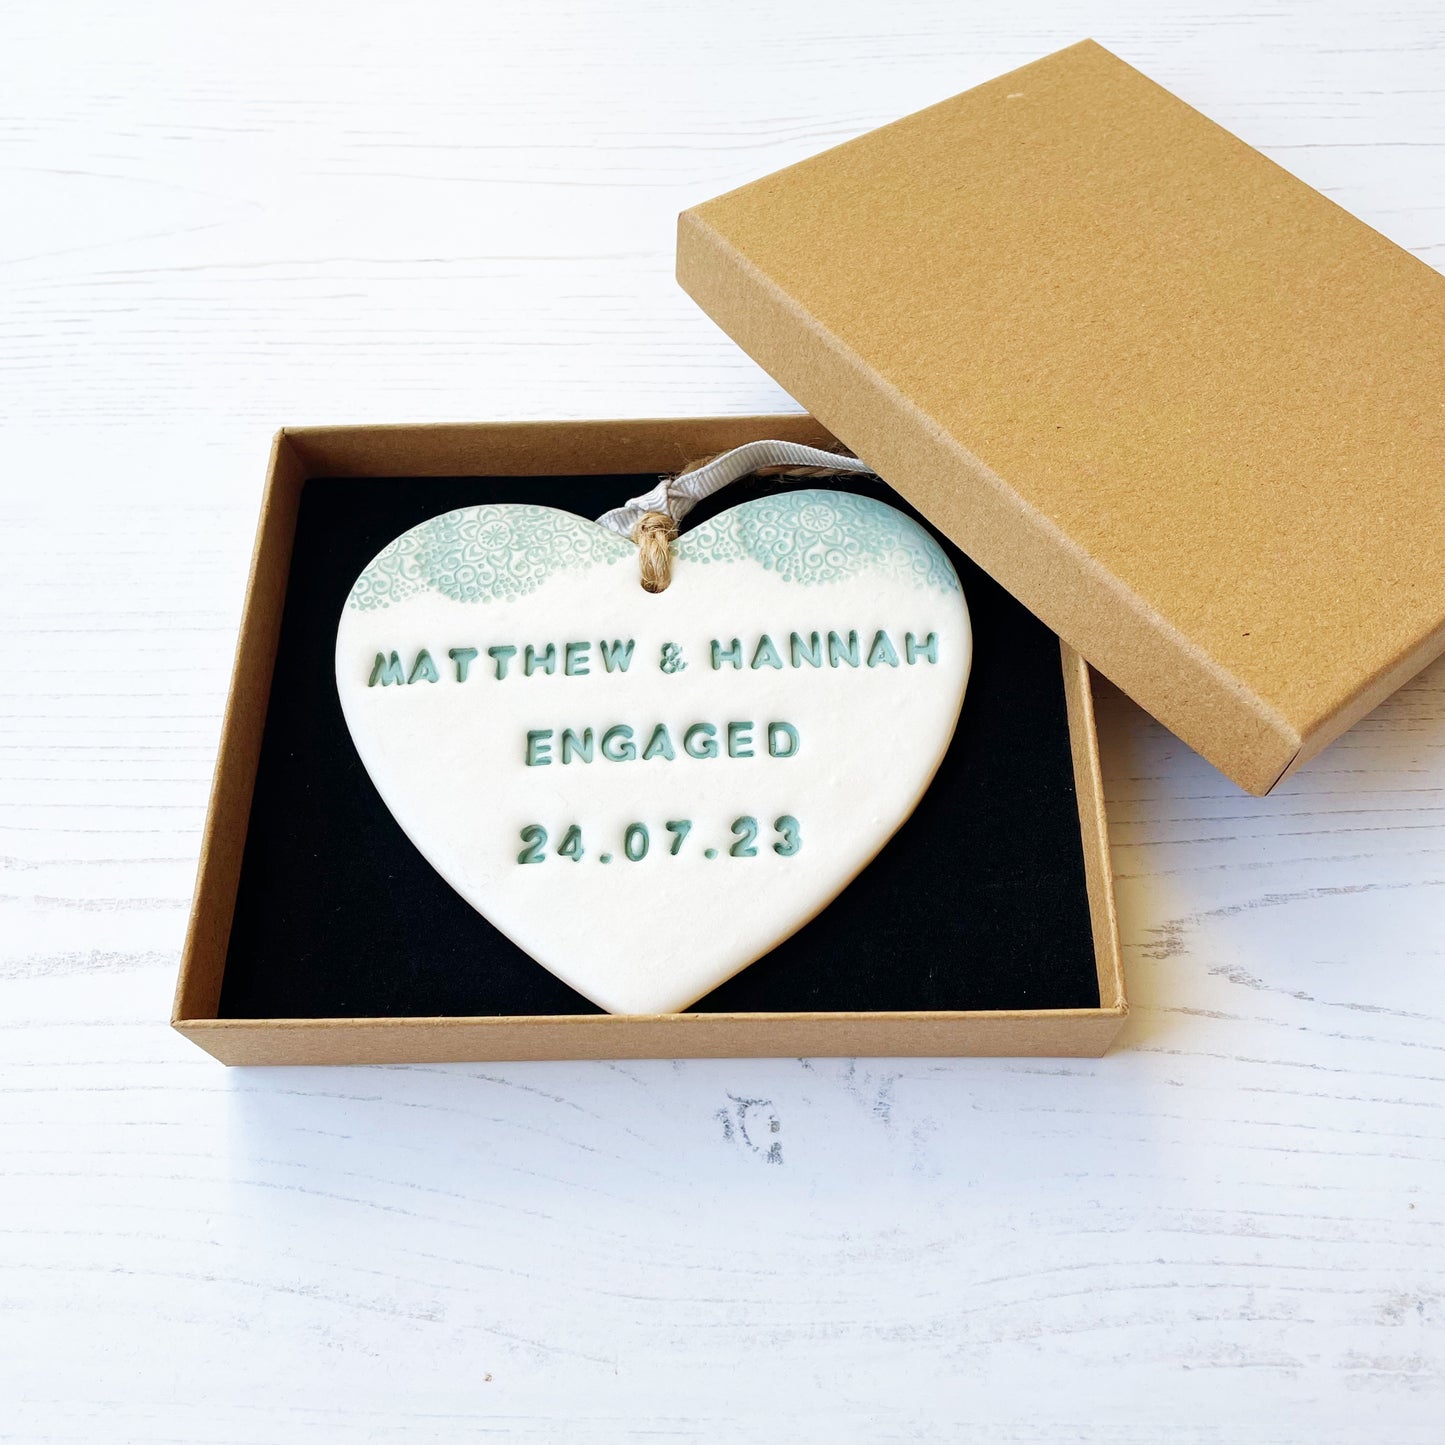 Personalised engagement gift, pearlised white clay hanging heart with a sage green lace edge at the top of the heart, the heart is personalised with MATTHEW & HANNAH ENGAGED 24.07.23 In a luxury Kraft brown gift box